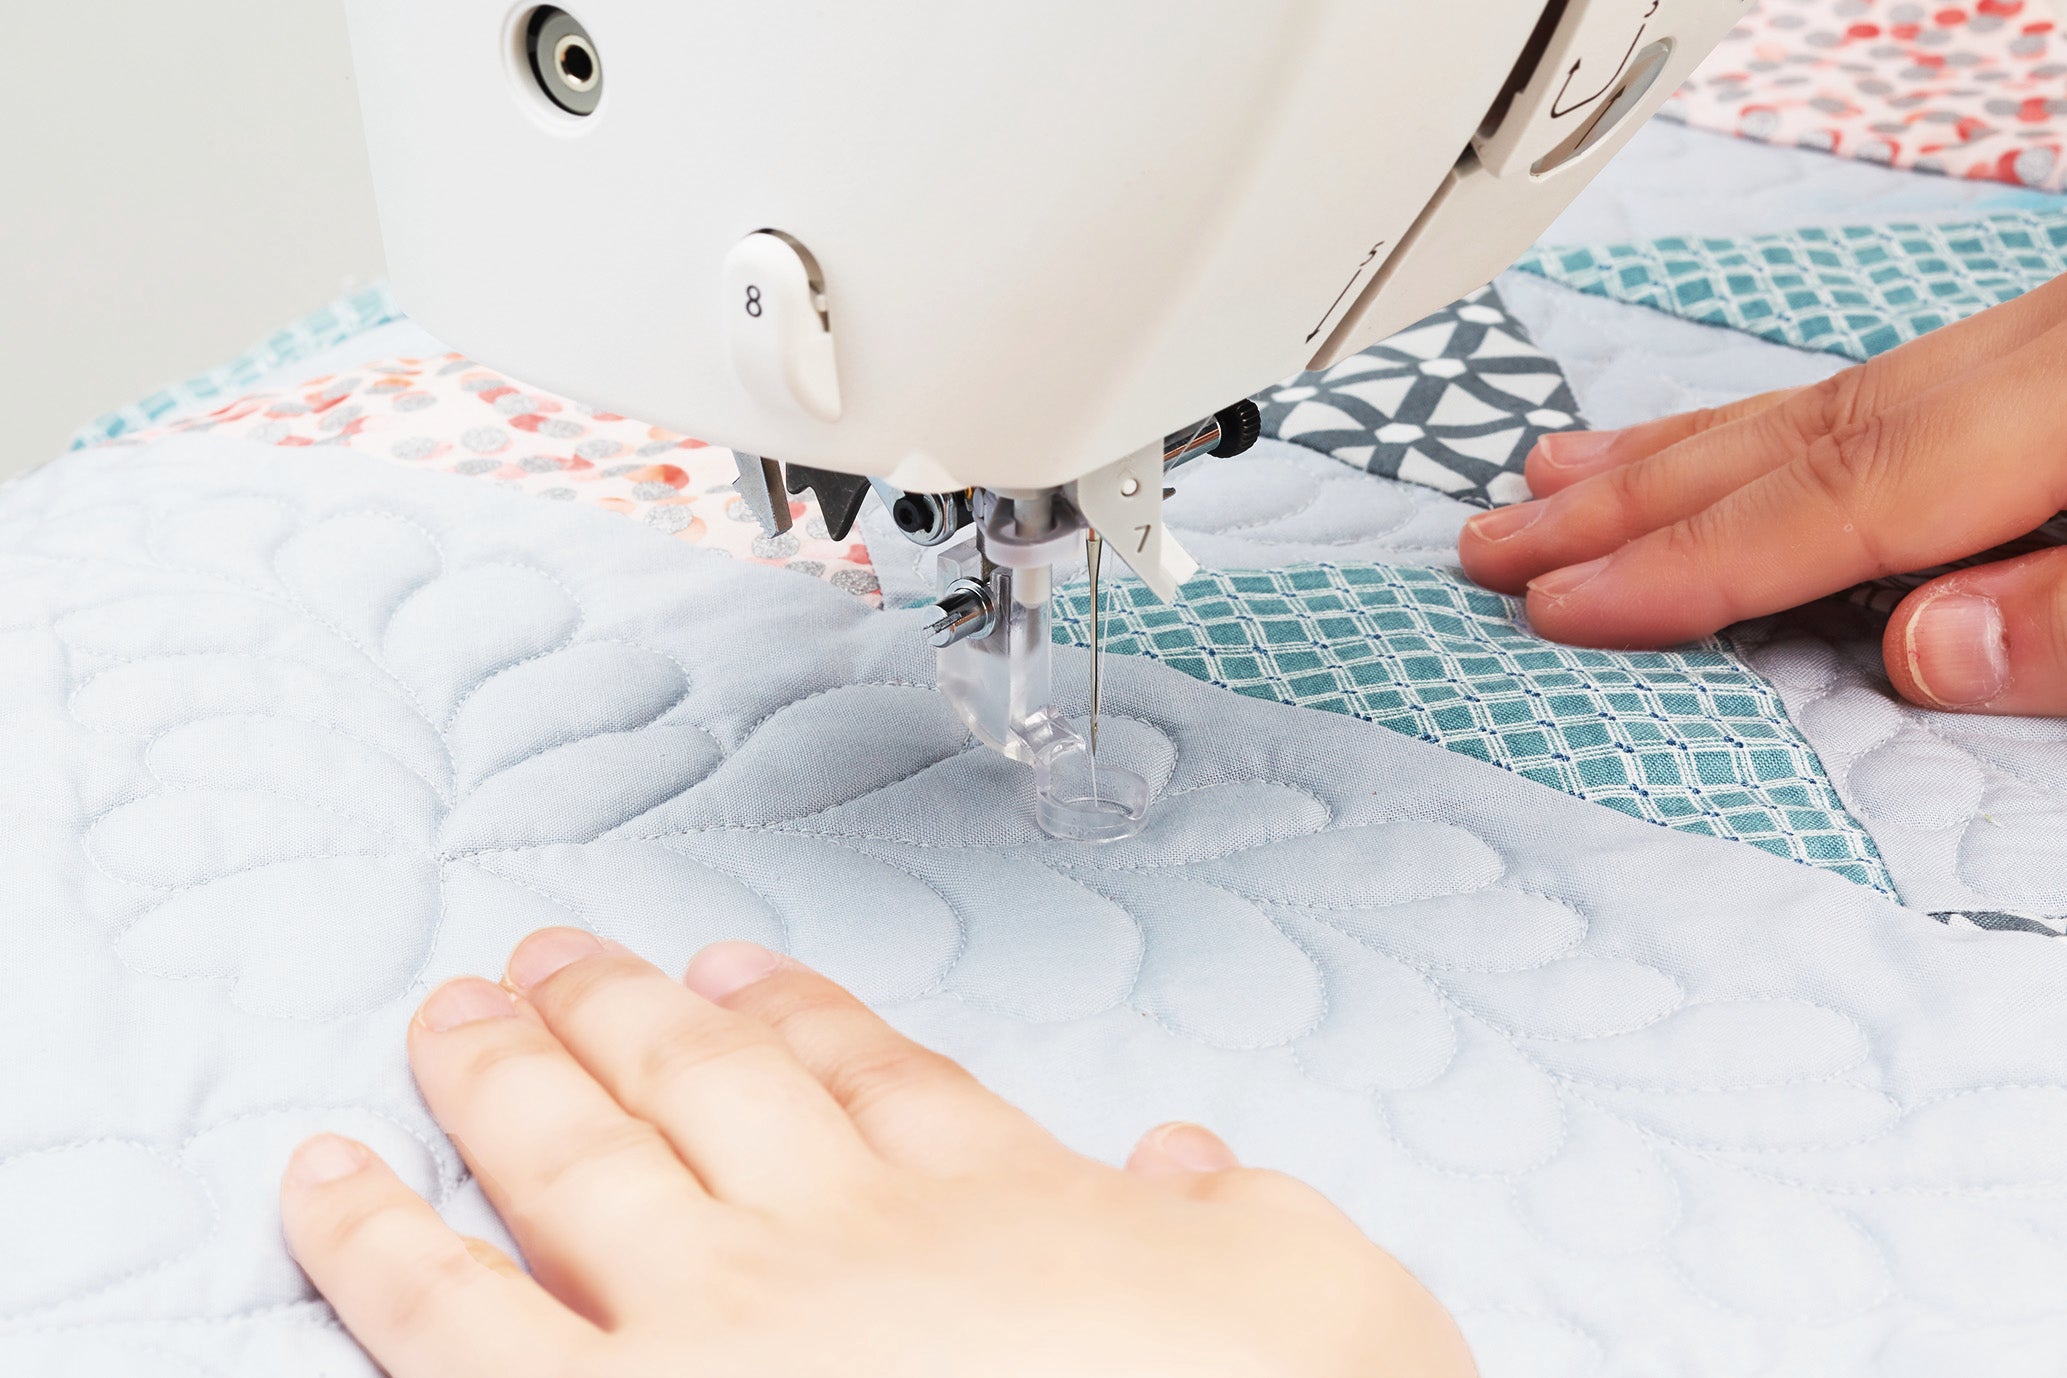 close up image of the JUKI HZL-NX7 Kirei Professional Quality Sewing and Quilting Machine being used to sew an item